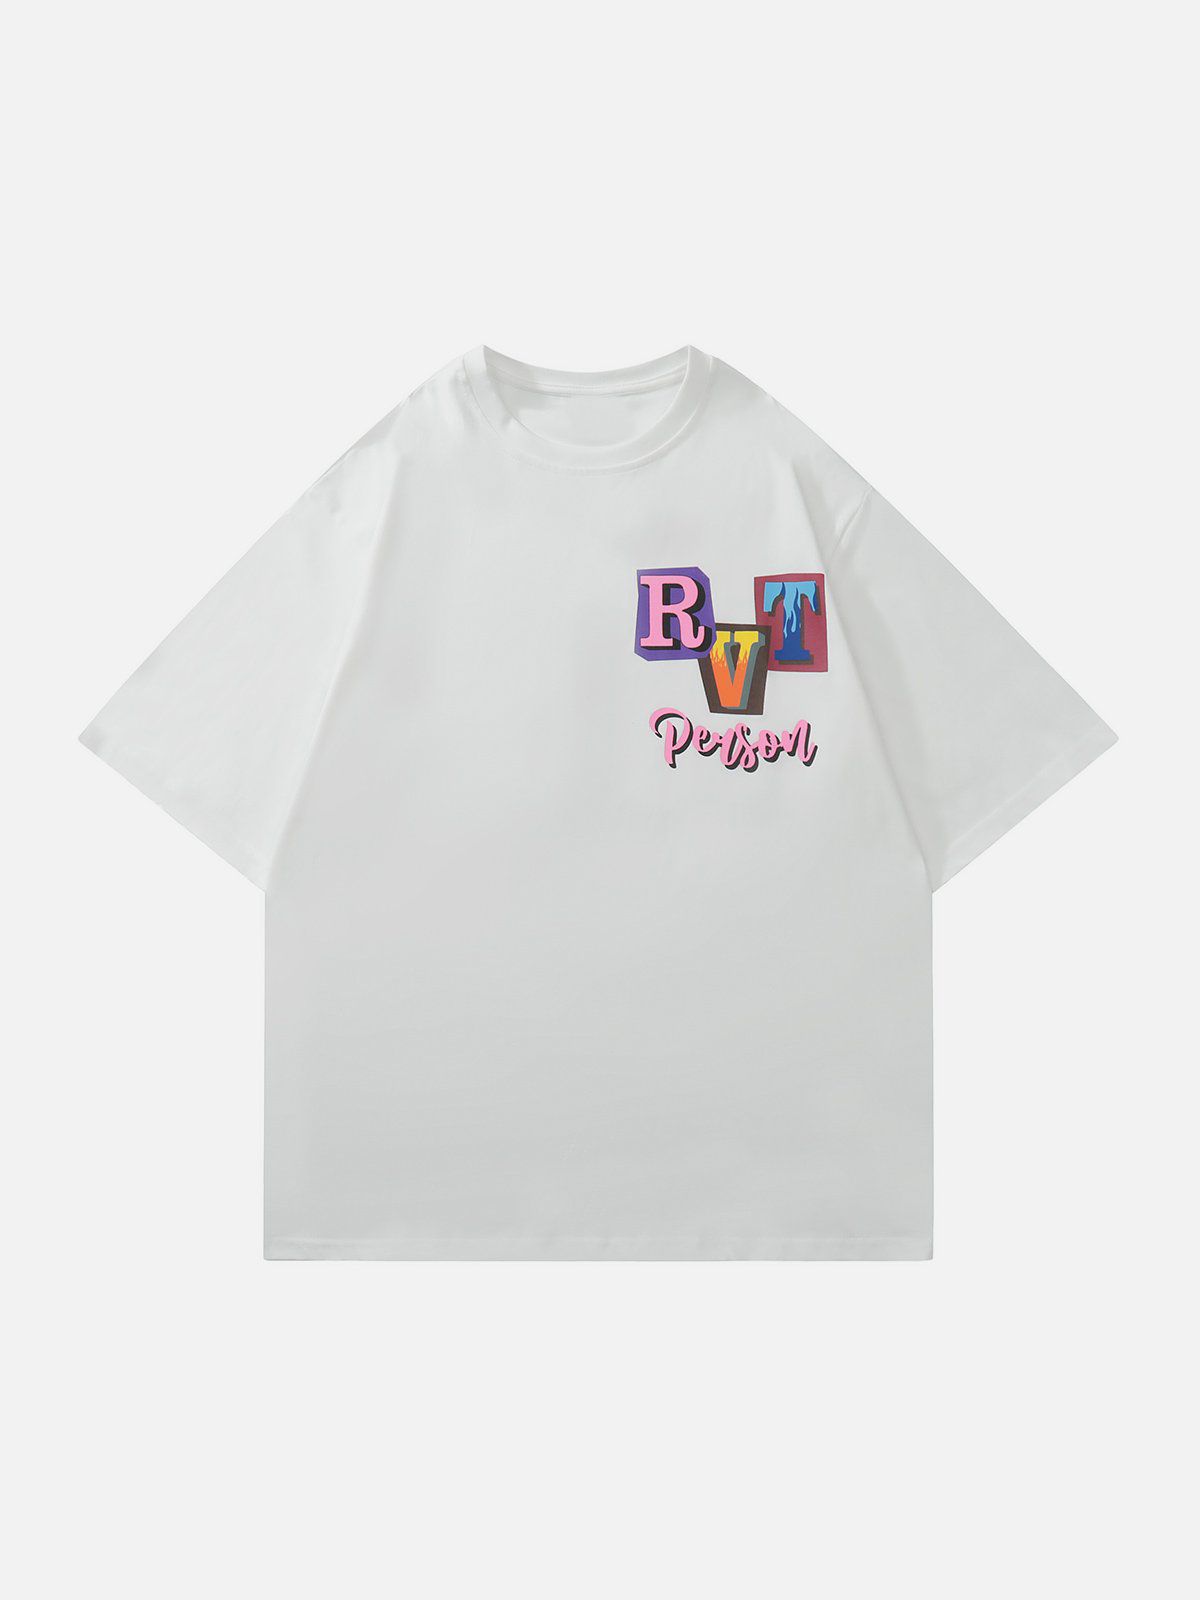 Sneakerland™ - Multicolor Flame Letter Tee